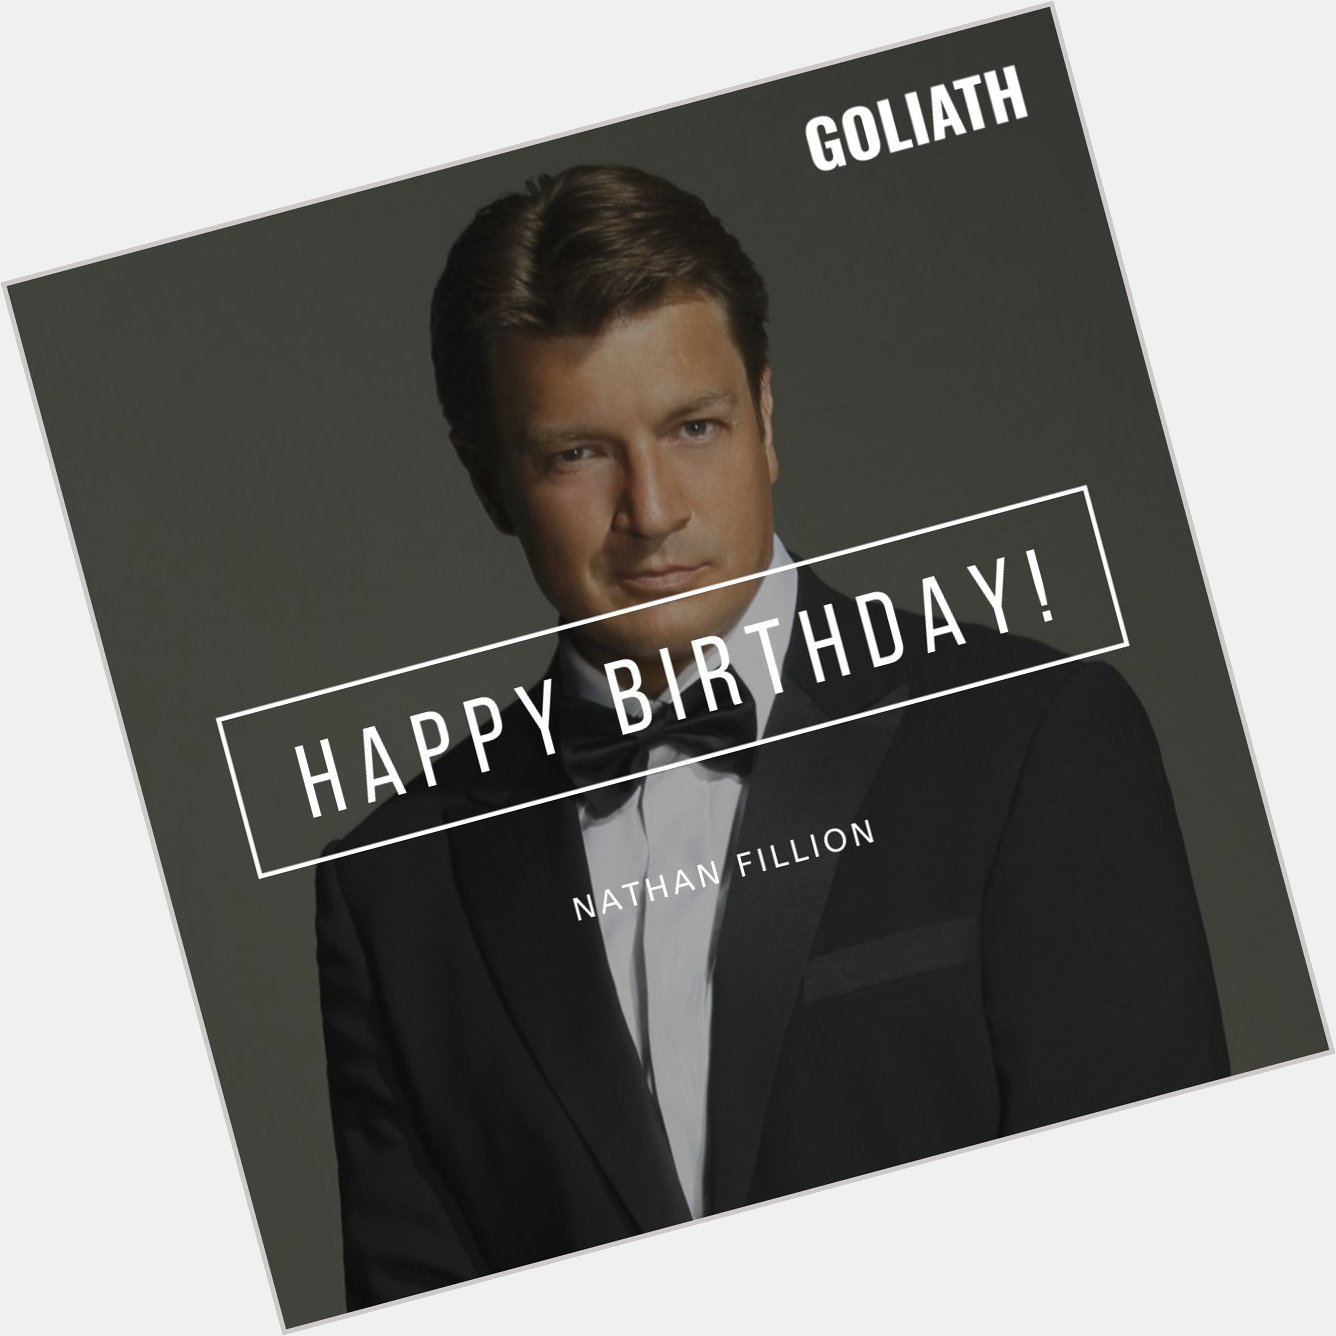 Happy 49th birthday to Nathan Fillion, best known for Castle, Firefly, Santa Clarita Diet, The Rookie, and Serenity. 